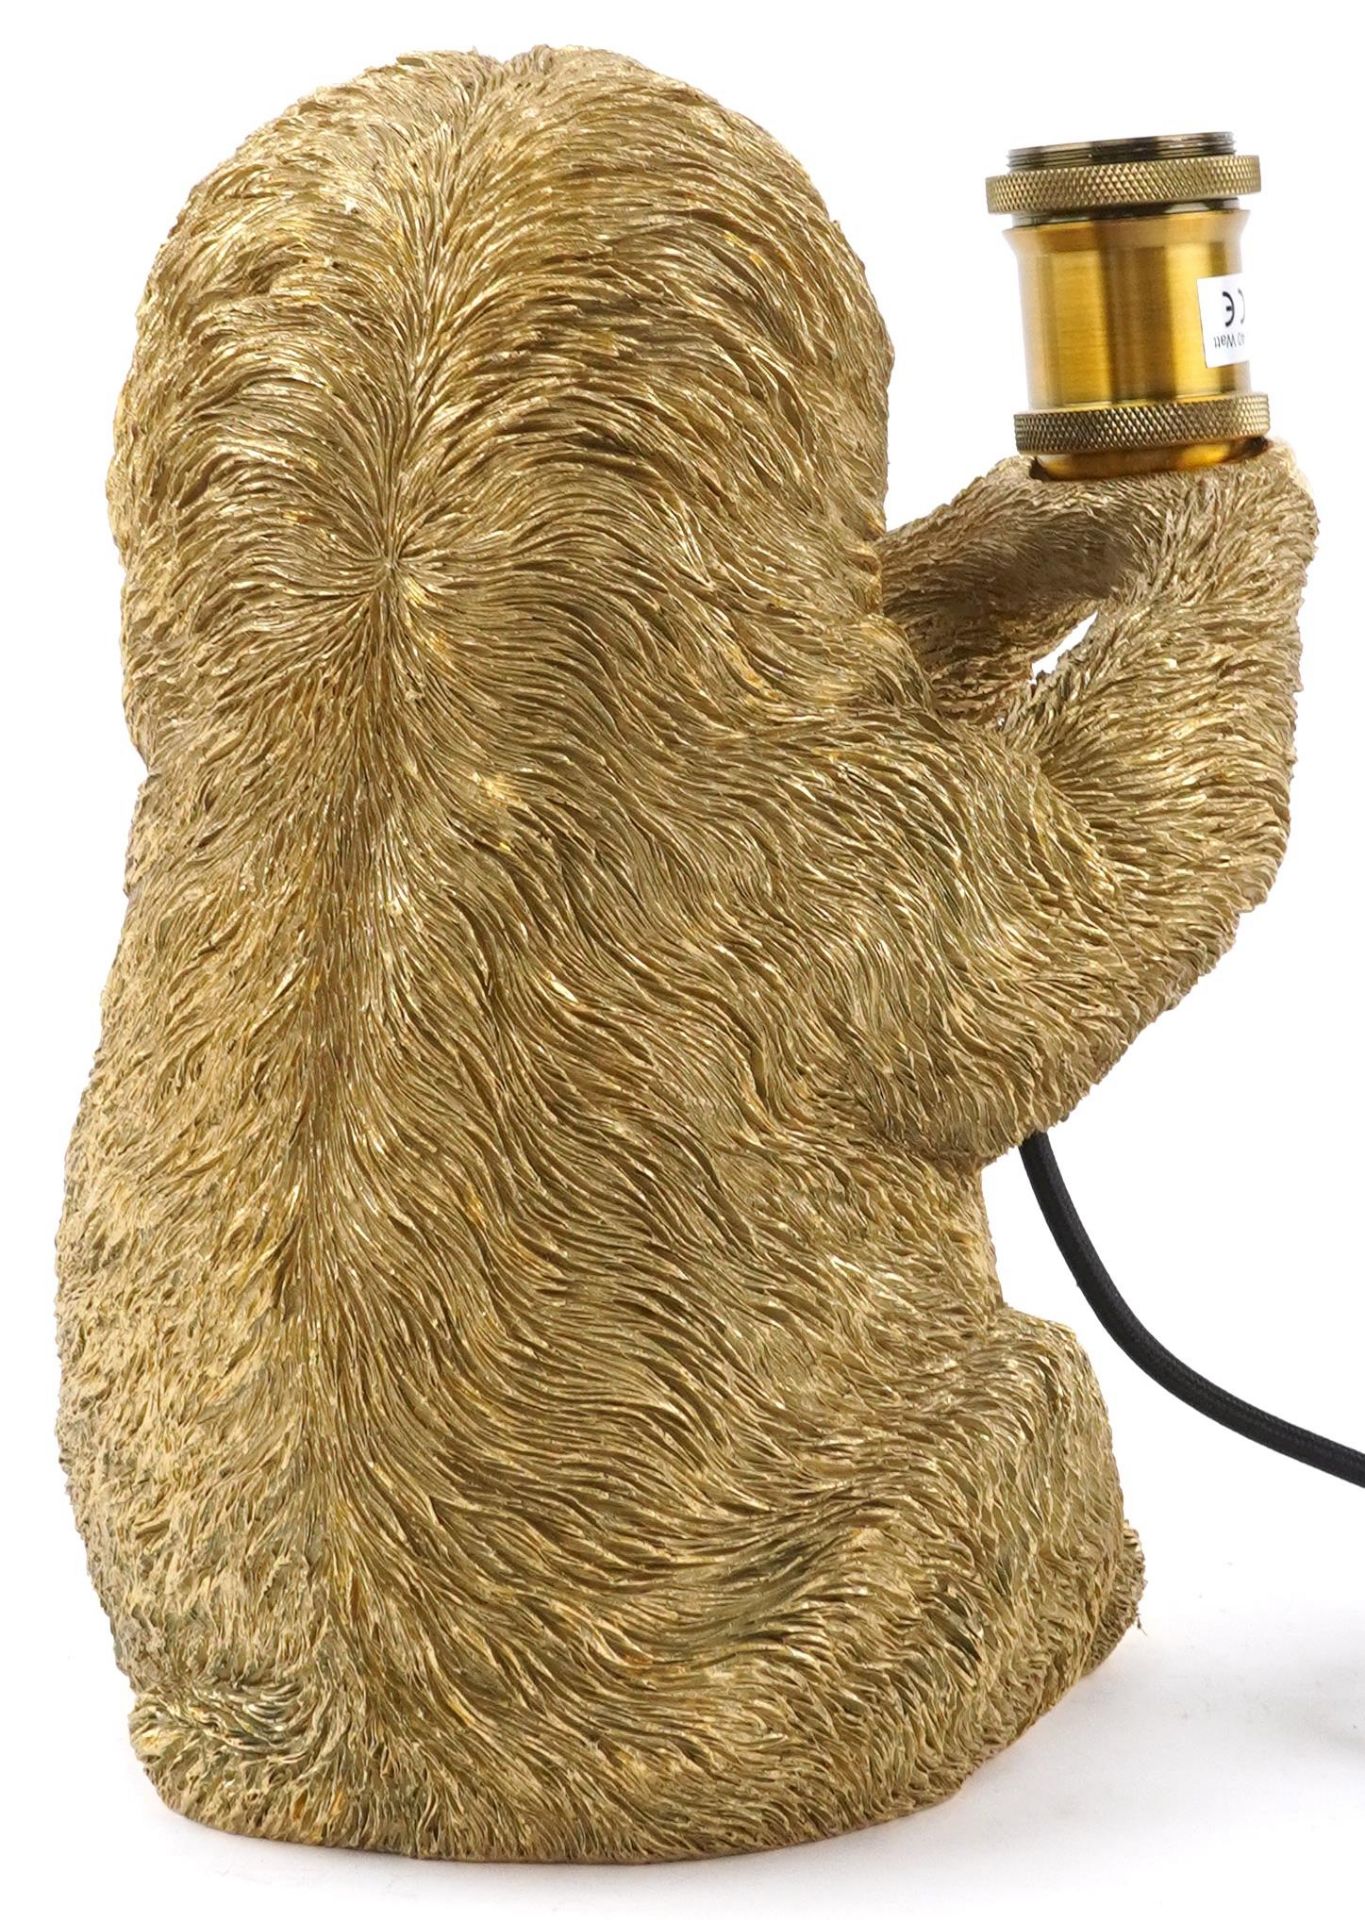 Ornate gilt painted table lamp in the form of a sloth, 30cm high - Bild 2 aus 3